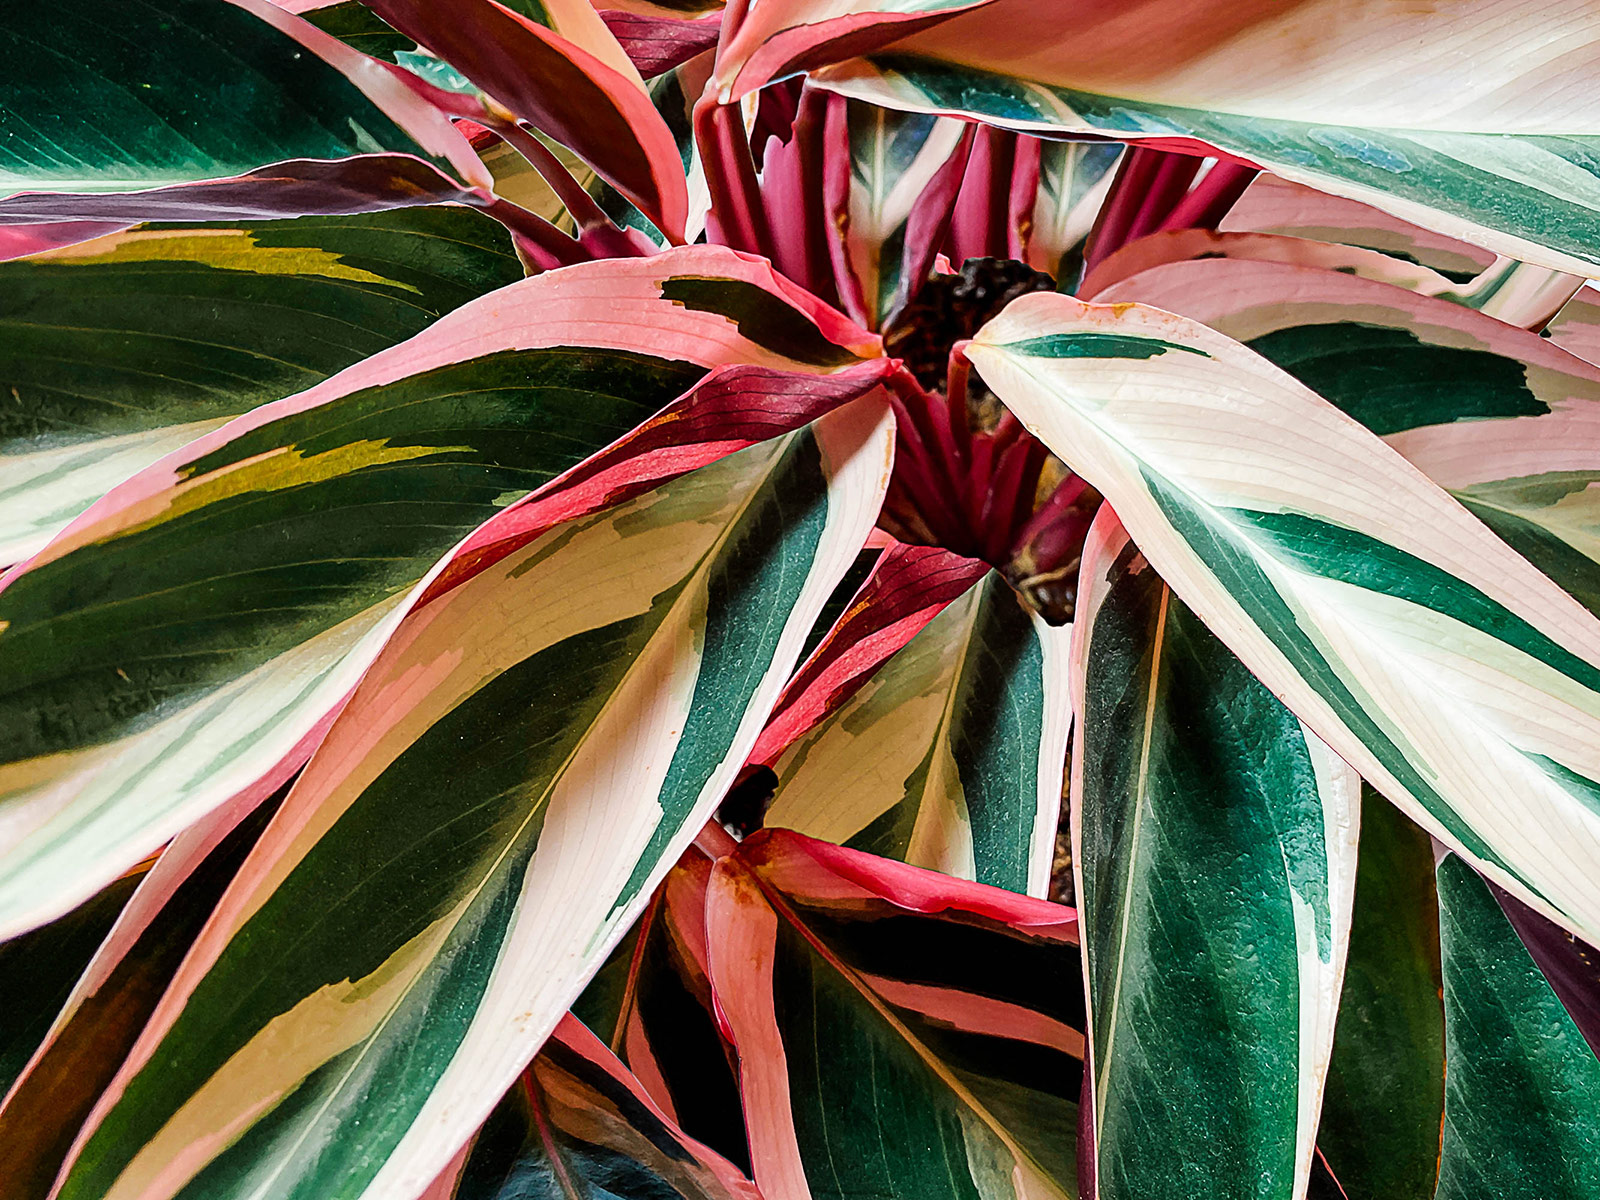 Stromanthe Triostar prayer plant showing multicolor pink, green, and white leaves